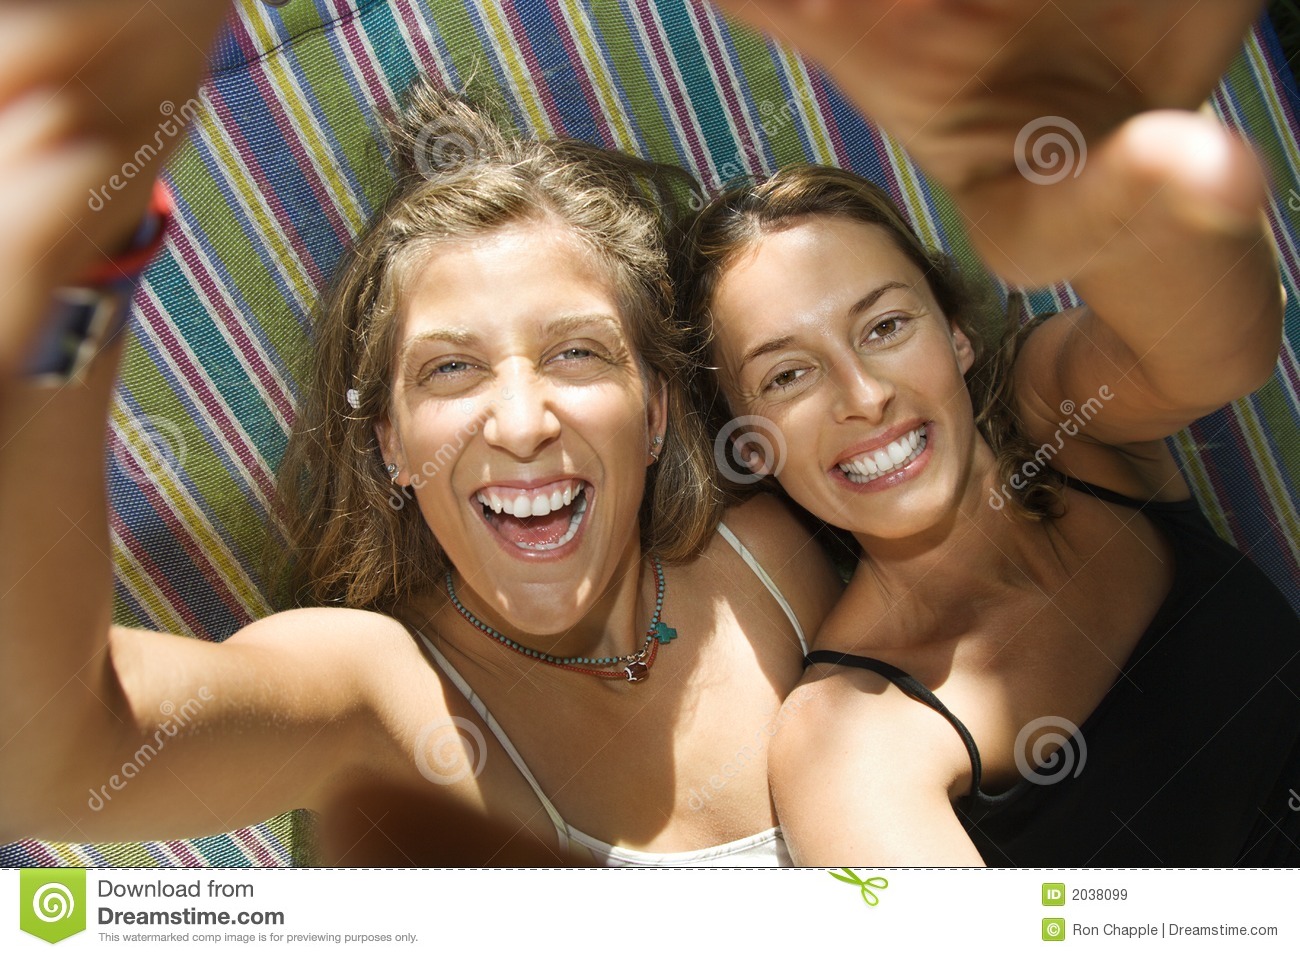 Women Being Silly In Hammock  Royalty Free Stock Images   Image